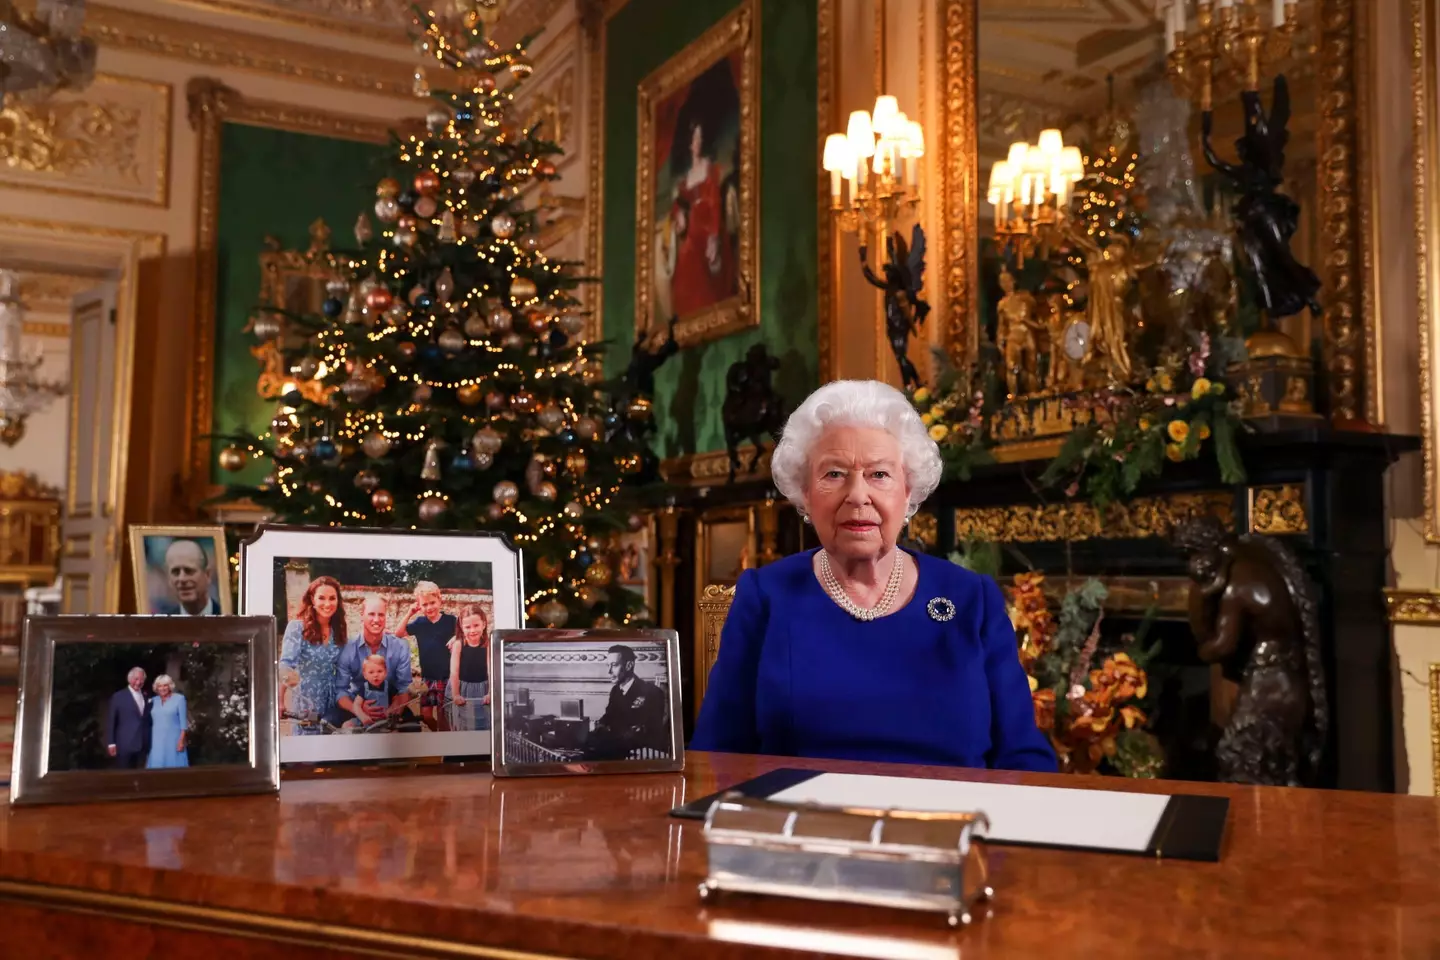 The Queen will reportedly eat quite a 'boring' Christmas meal.